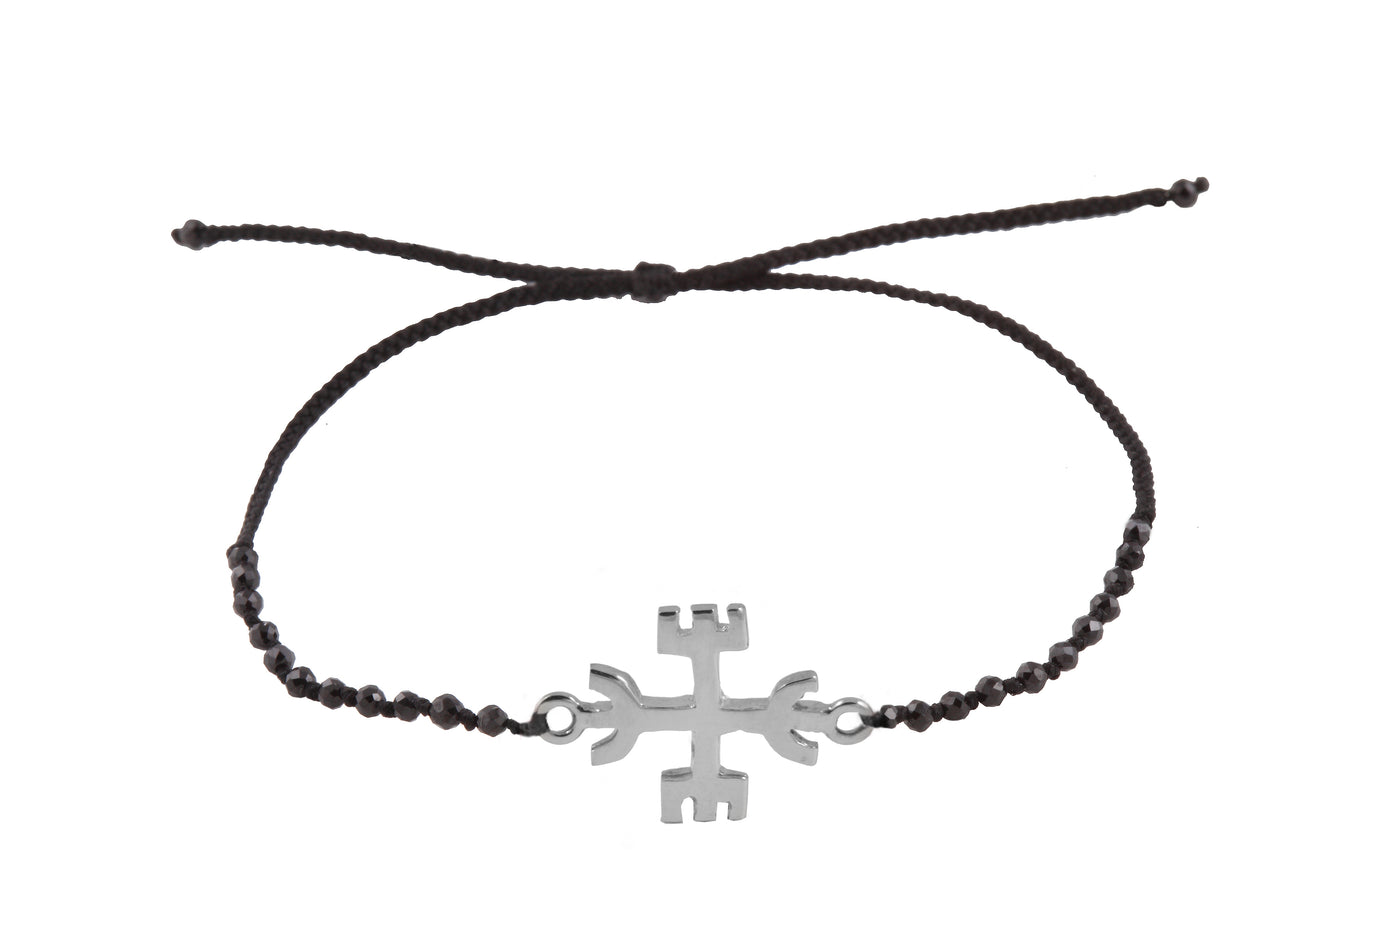 Bind rune "Protection amulet" bracelet with beads. Silver